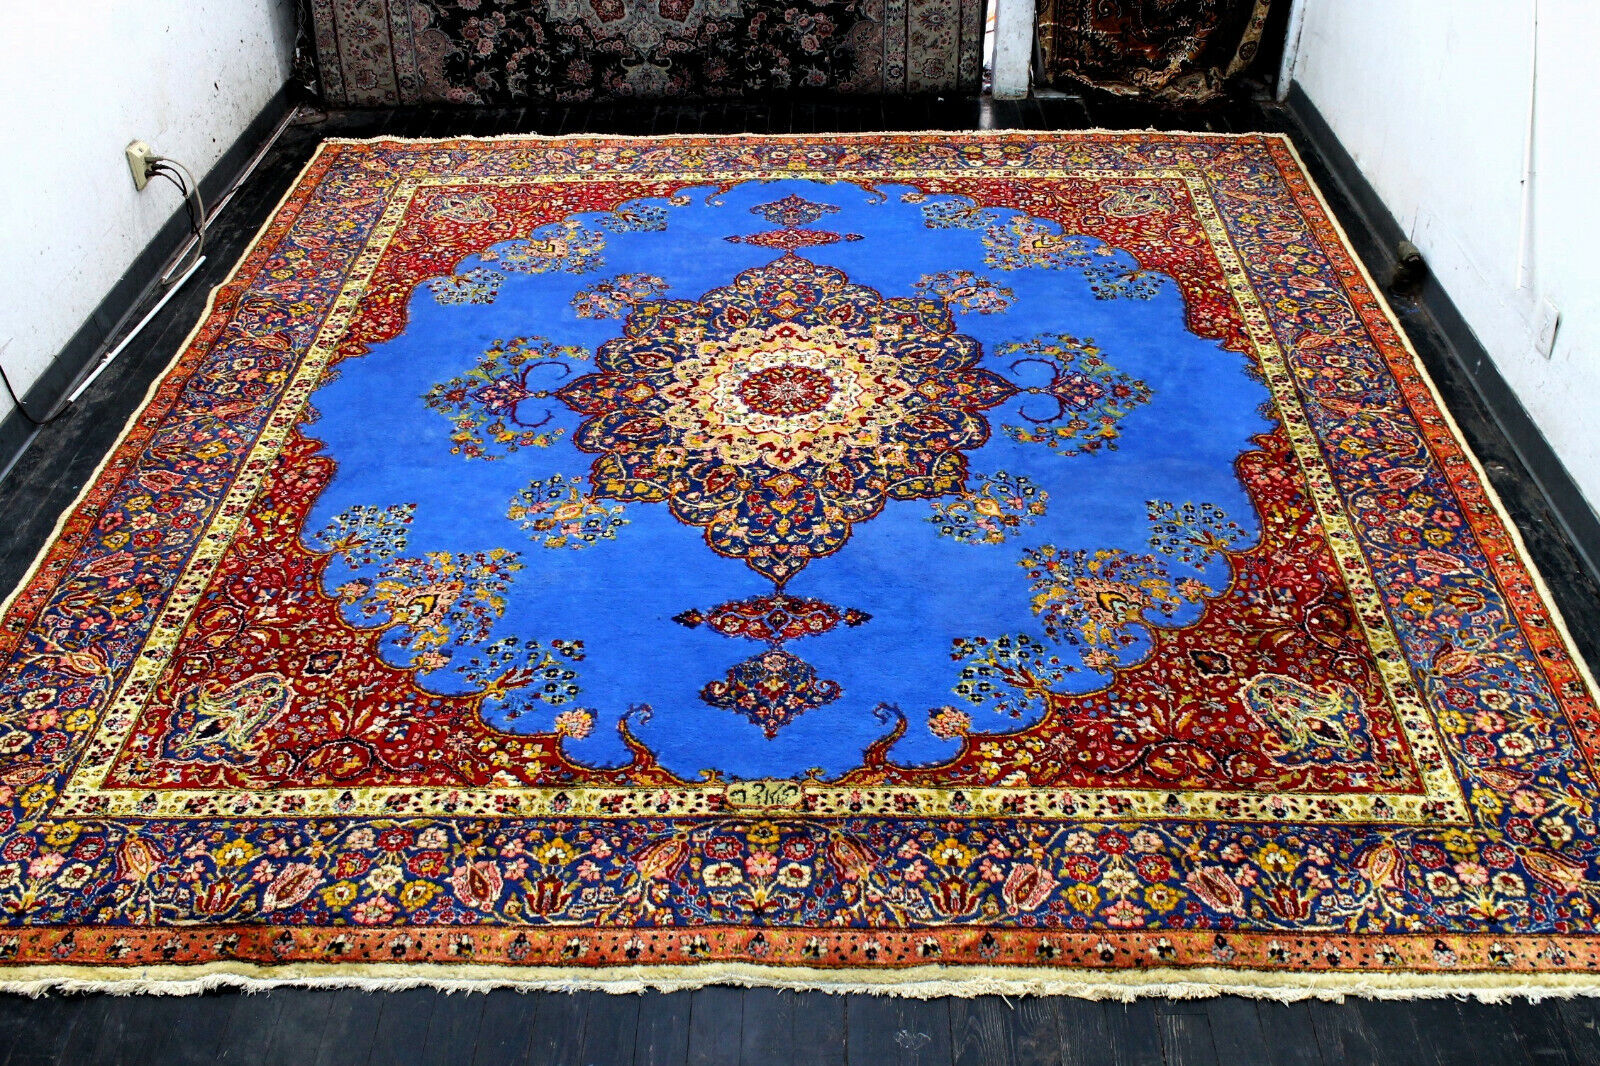 11X11 1940's SIGNED ANTIQUE VEGETABLE DYE HAND KNOTTED SQUARE TABRIZZ WOOL RUG